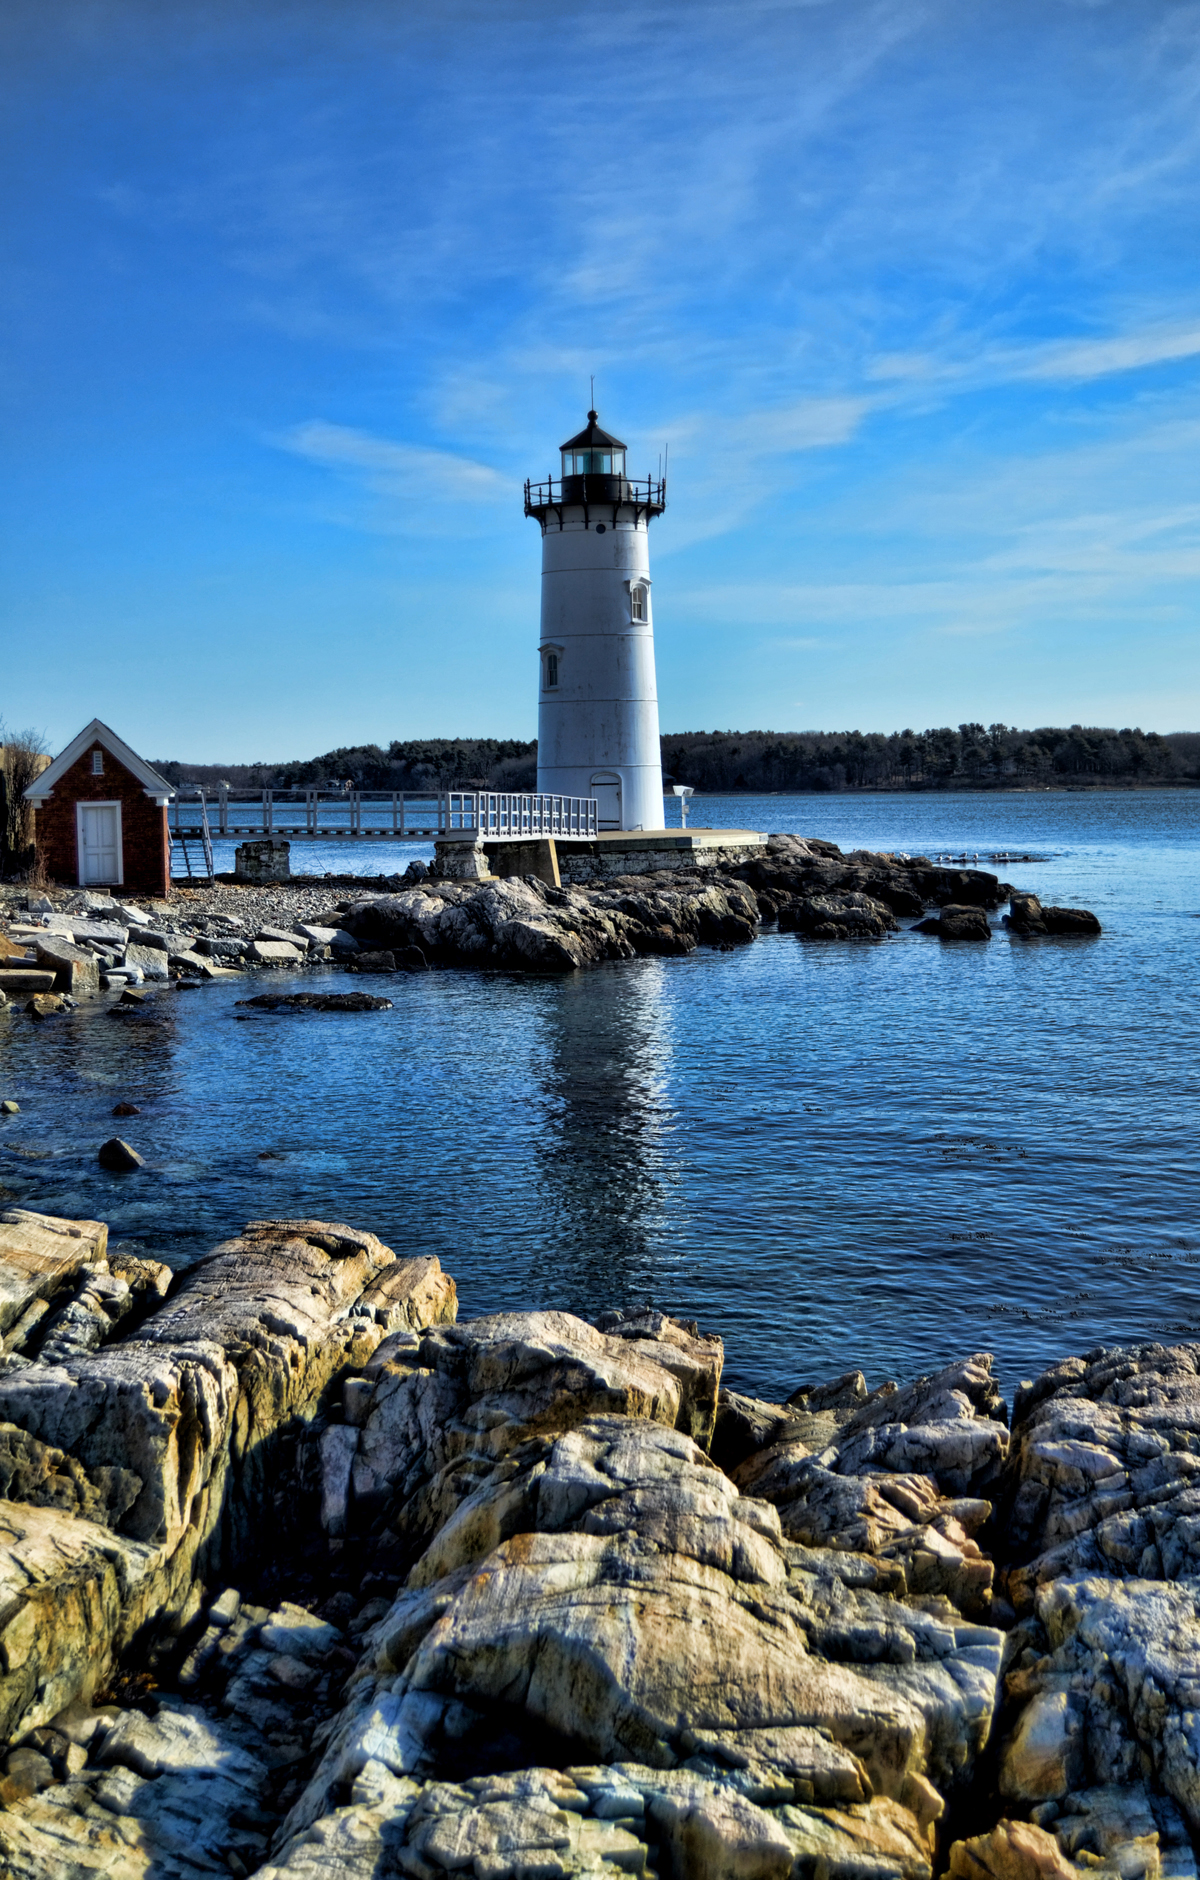 Lighthouse, Newcastle, Nh (user submitted)